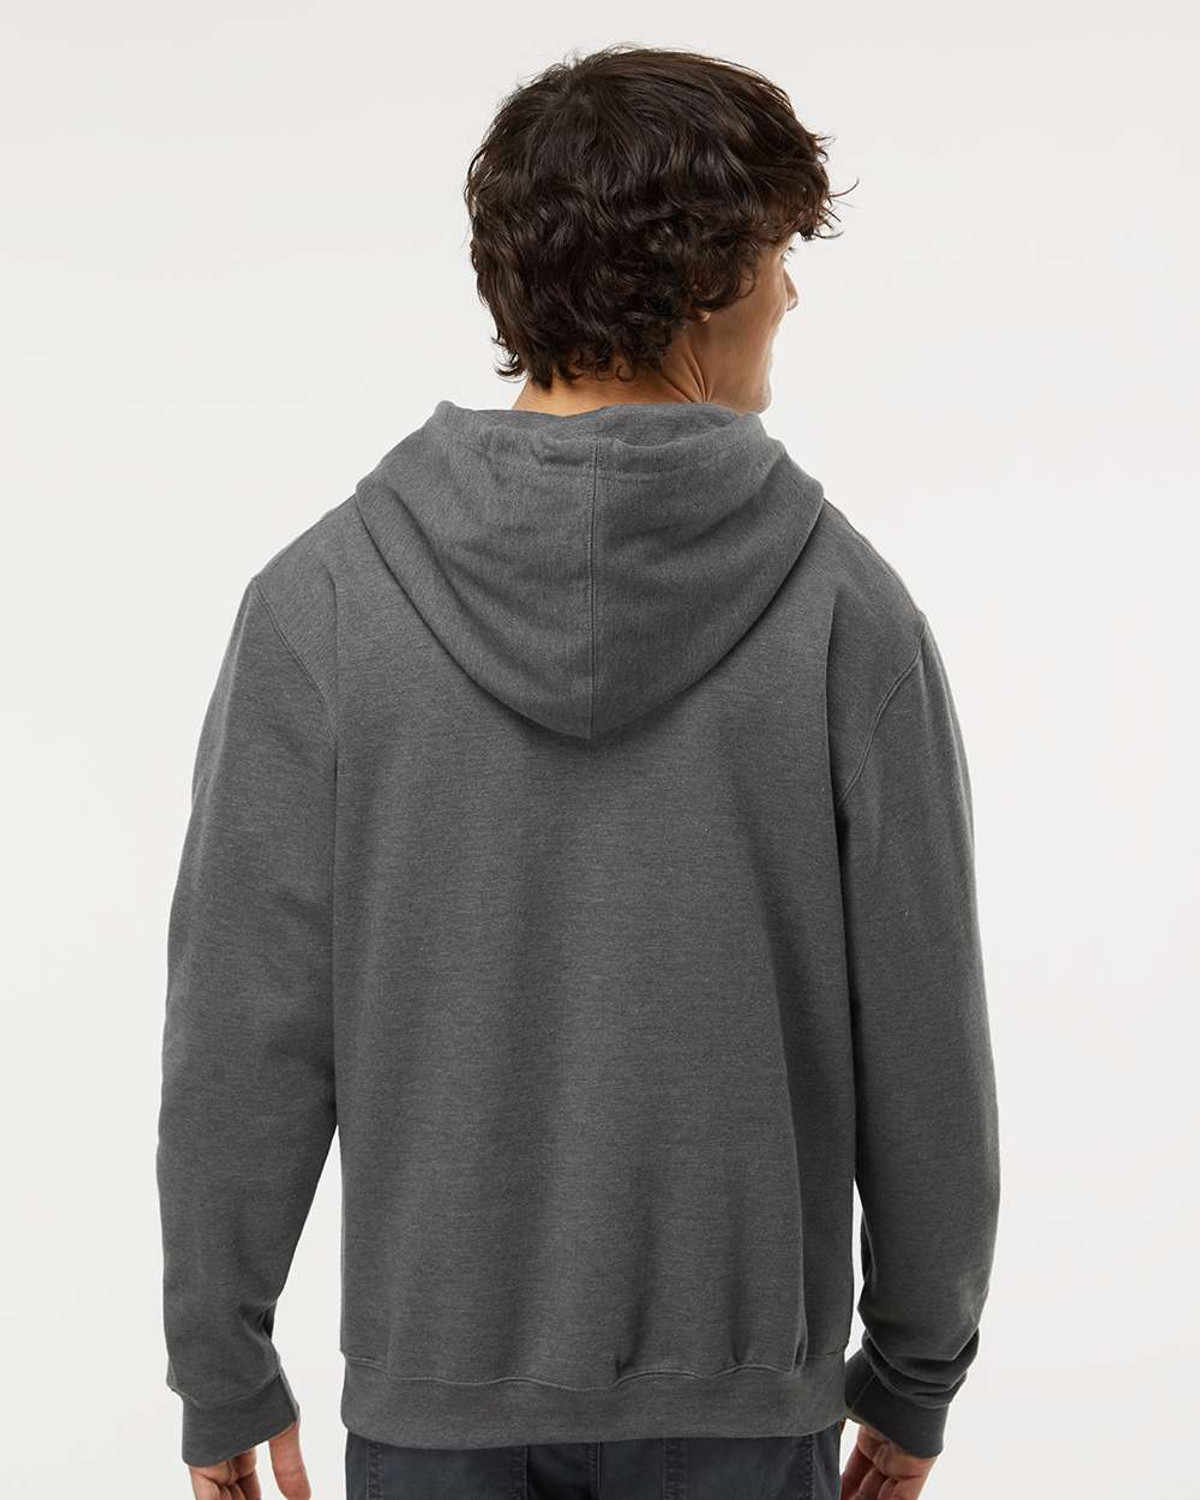 M&O Unisex Pullover Hoodie